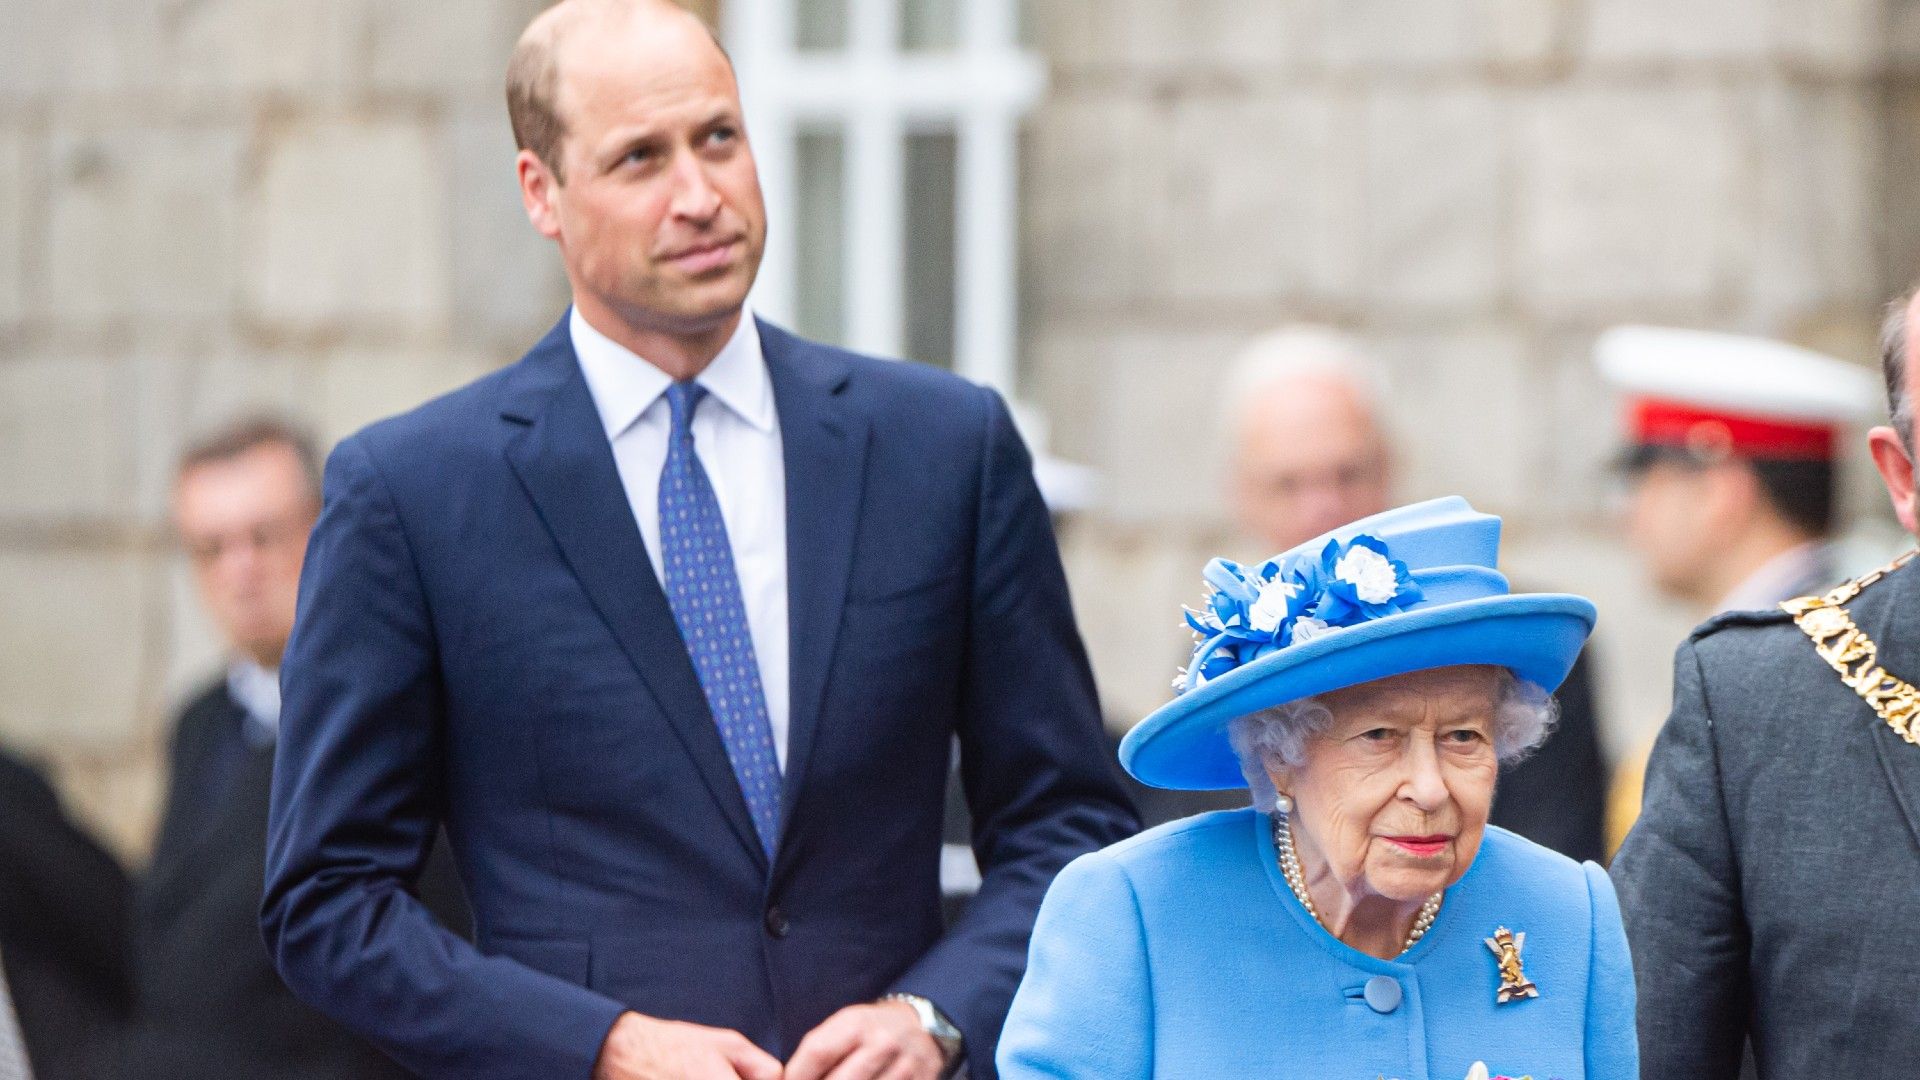 <p>                     It is tradition, or perhaps rather, protocol, for members of the royal family to walk behind the monarch, rather than in front of or sometimes even alongside them, during official events.                   </p>                                      <p>                     This is used as a way to openly display the hierarchy of royal family members, with the monarch at the head of the family, and their family members behind them in order of their proximity to the throne. Queen Elizabeth II, for example, regularly walked ahead of her husband Prince Philip during important royal events, such as state dinners, while the then Prince Charles walked behind both his mother and father, as the Prince of Wales. Now, Prince William and his family are often seen walking behind King Charles and Queen Camilla at formal royal events.                   </p>